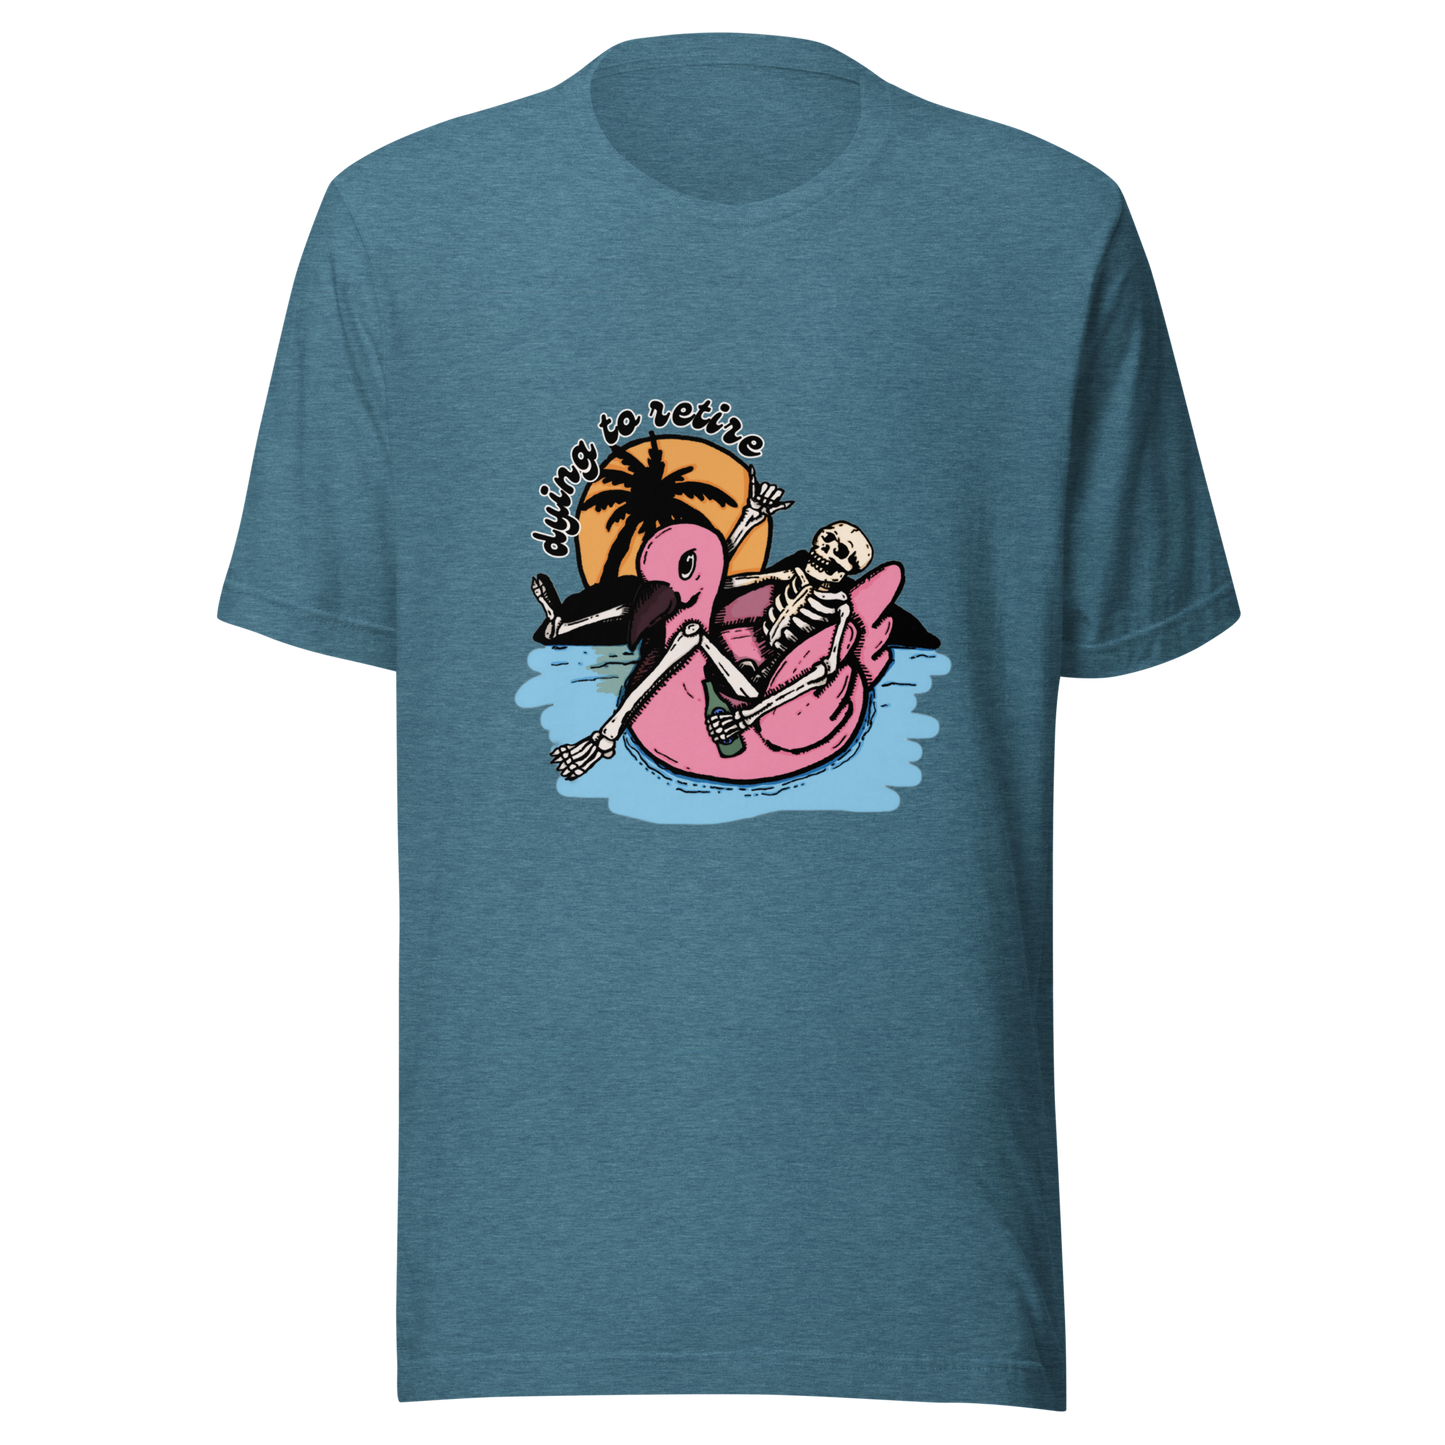 dying to retire t-shirt in teal - gaslit apparel